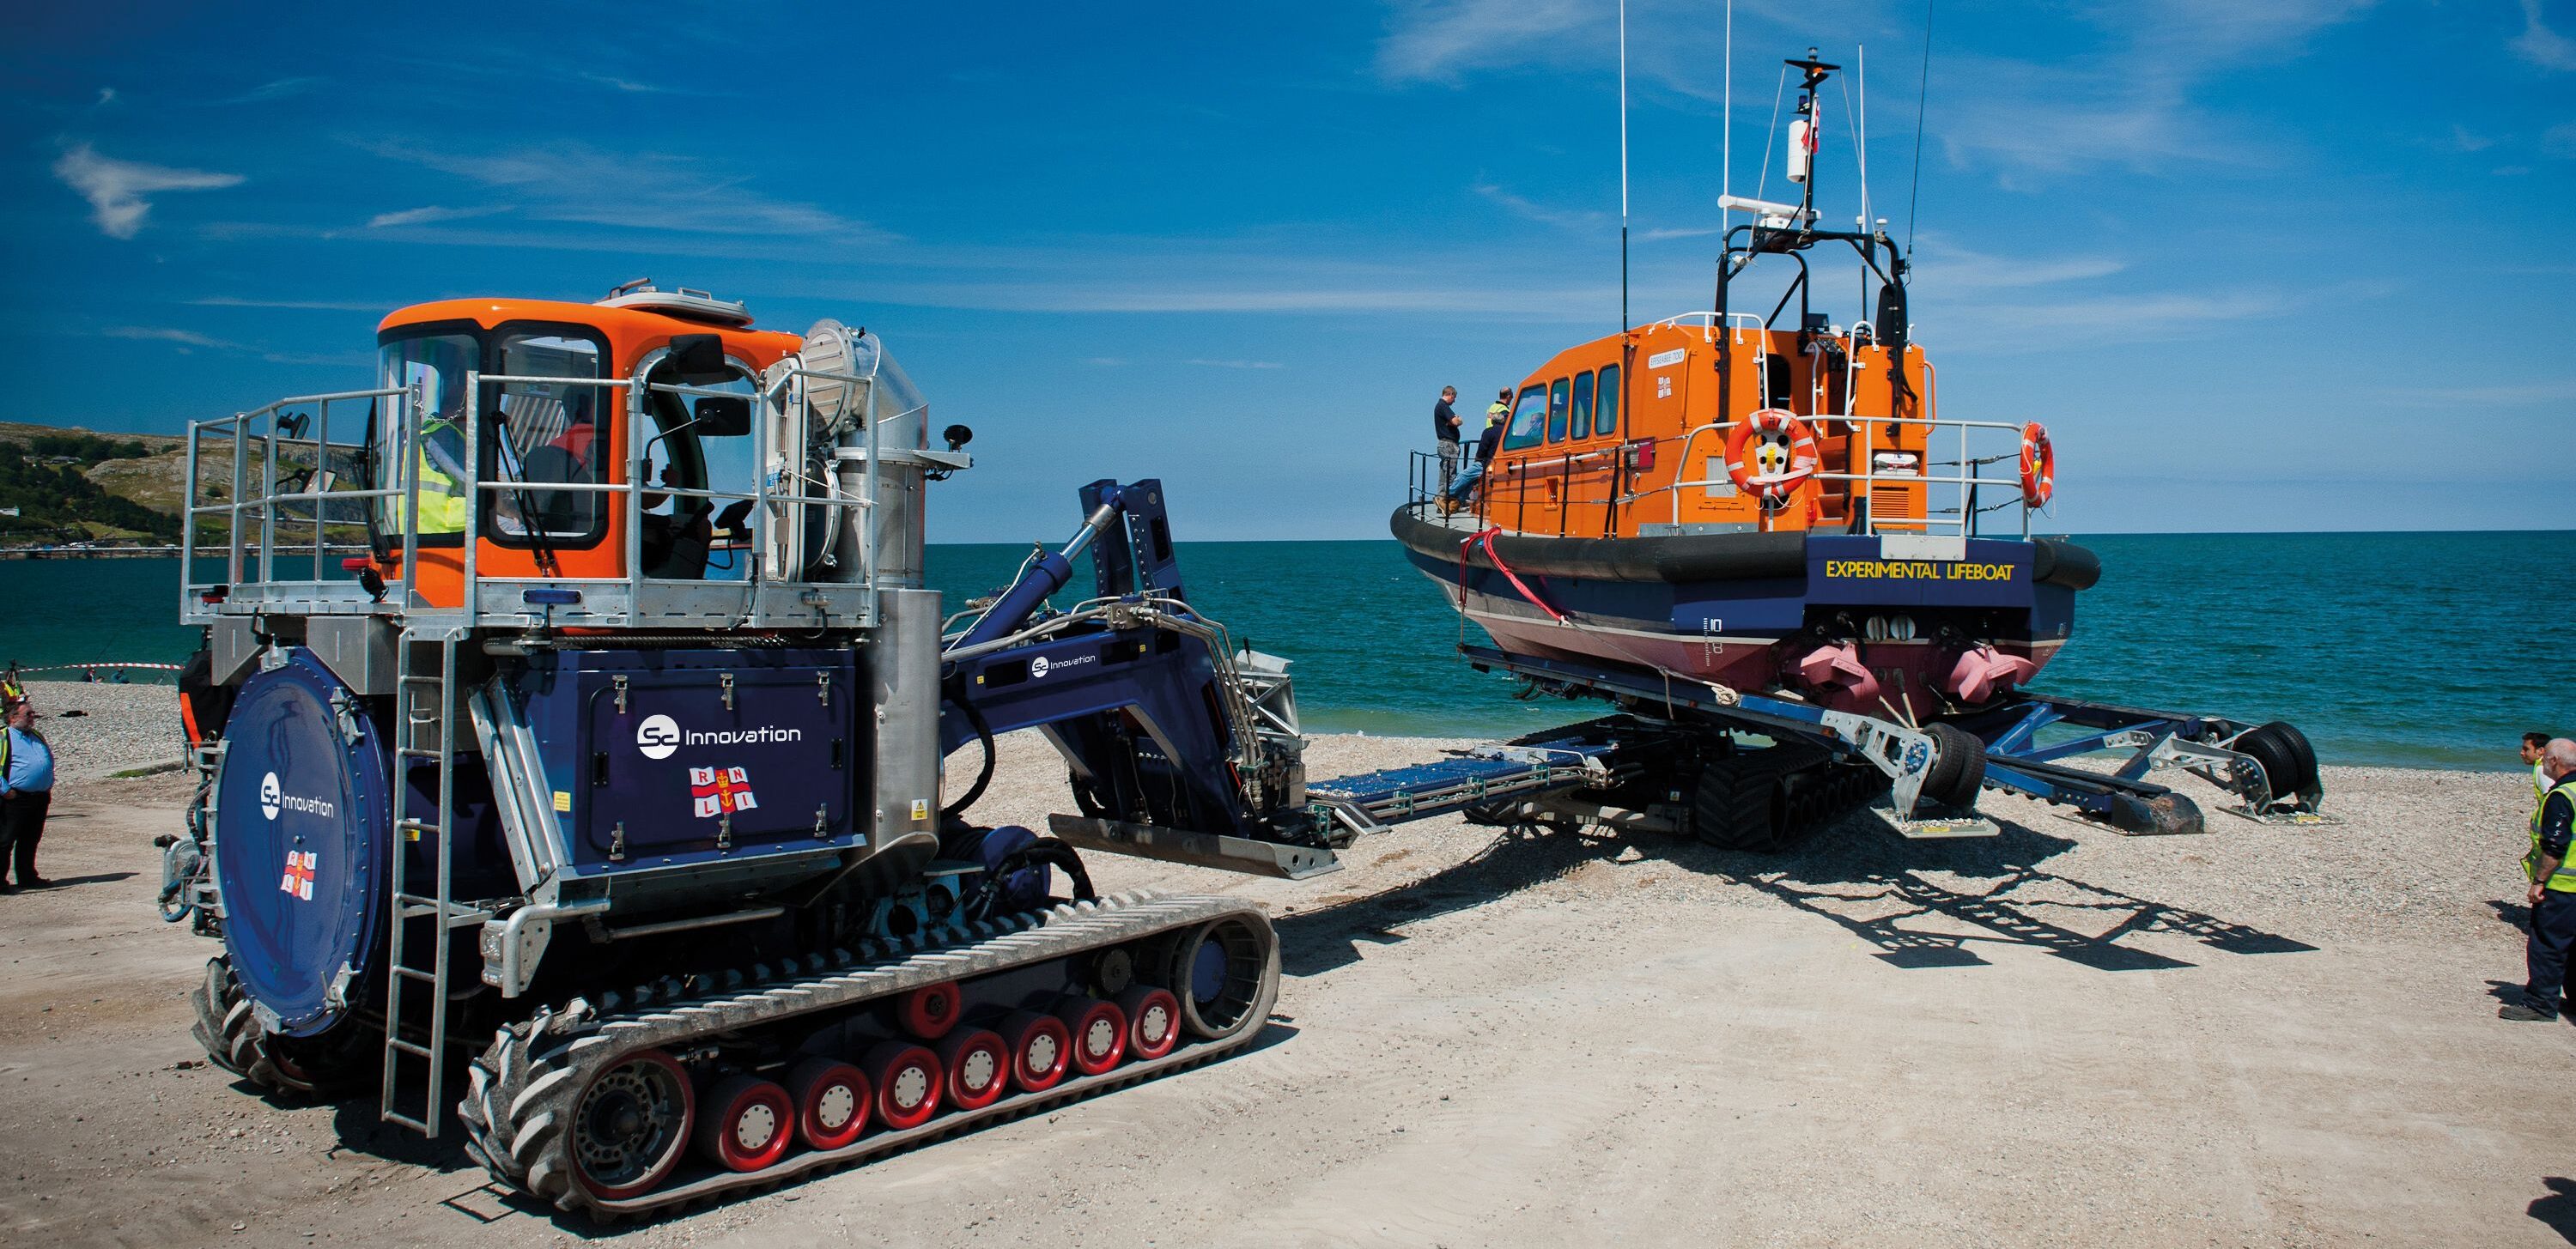 SC Innovation Lifeboat Launcher and Recovery System